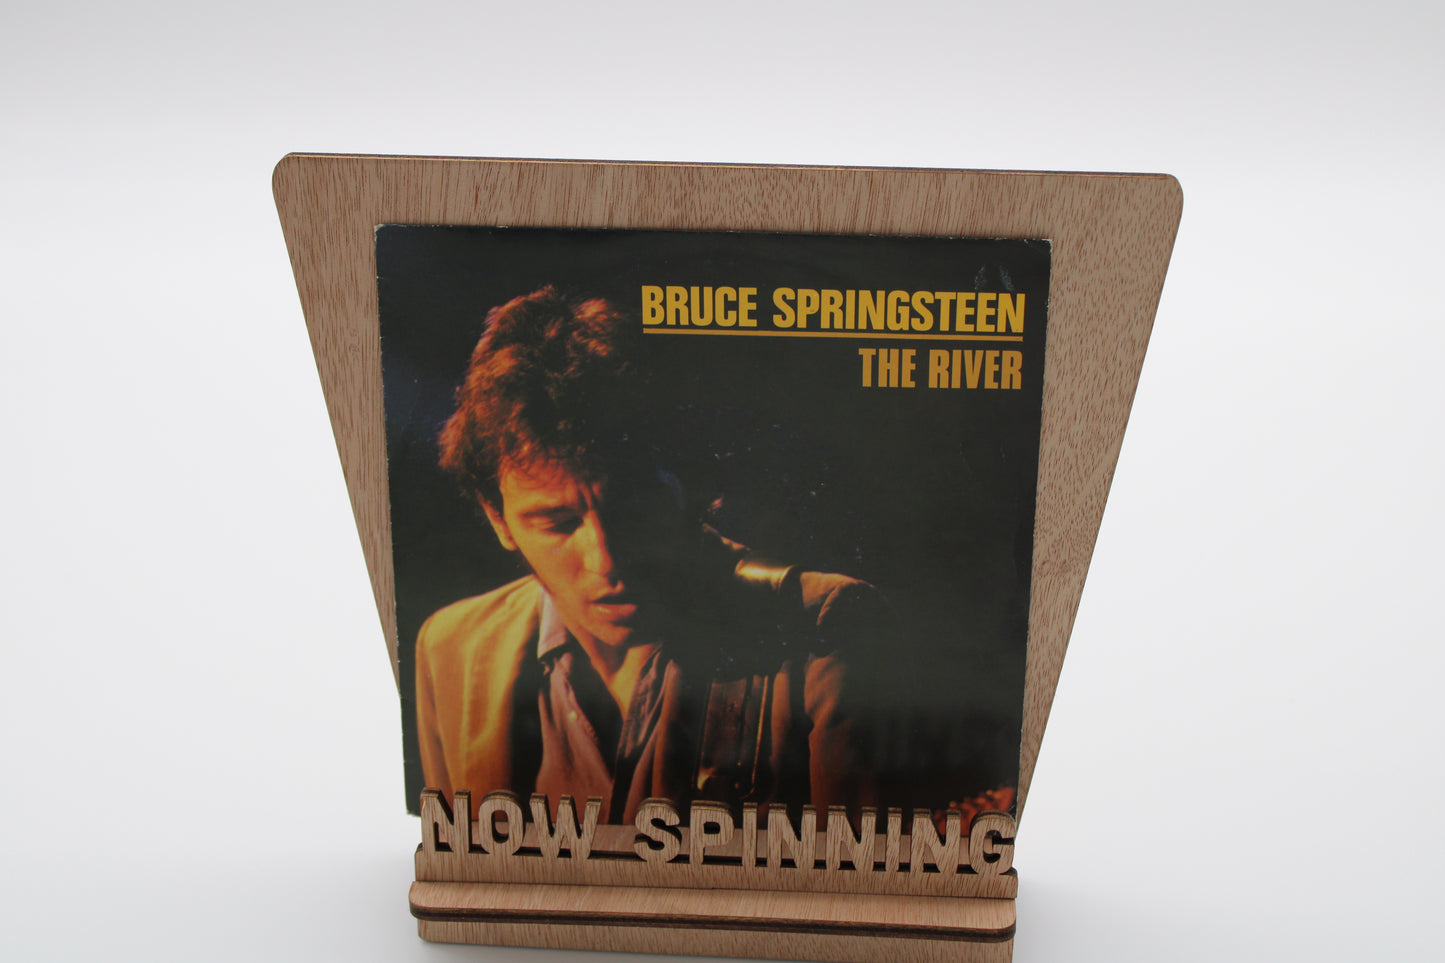 Bruce Springsteen 45 Record 7" Vinyl The River & Independence Day Import Collectible